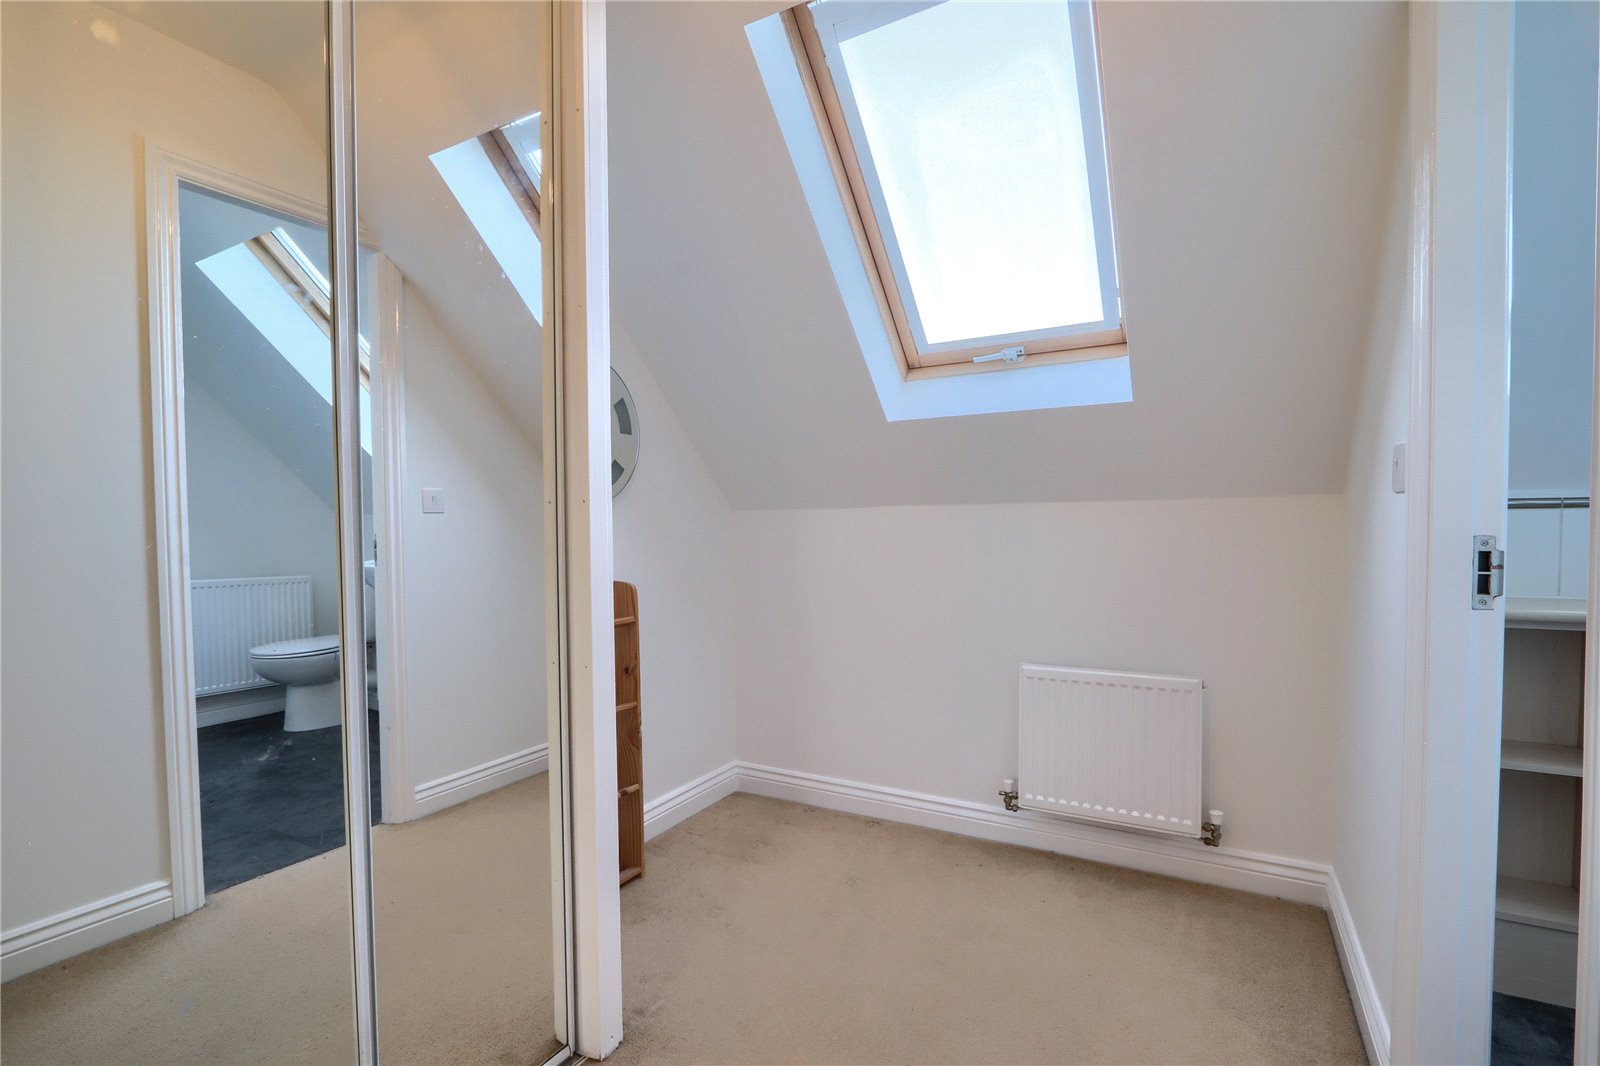 3 bed house for sale in Pennyroyal Road, Stockton-on-Tees  - Property Image 7